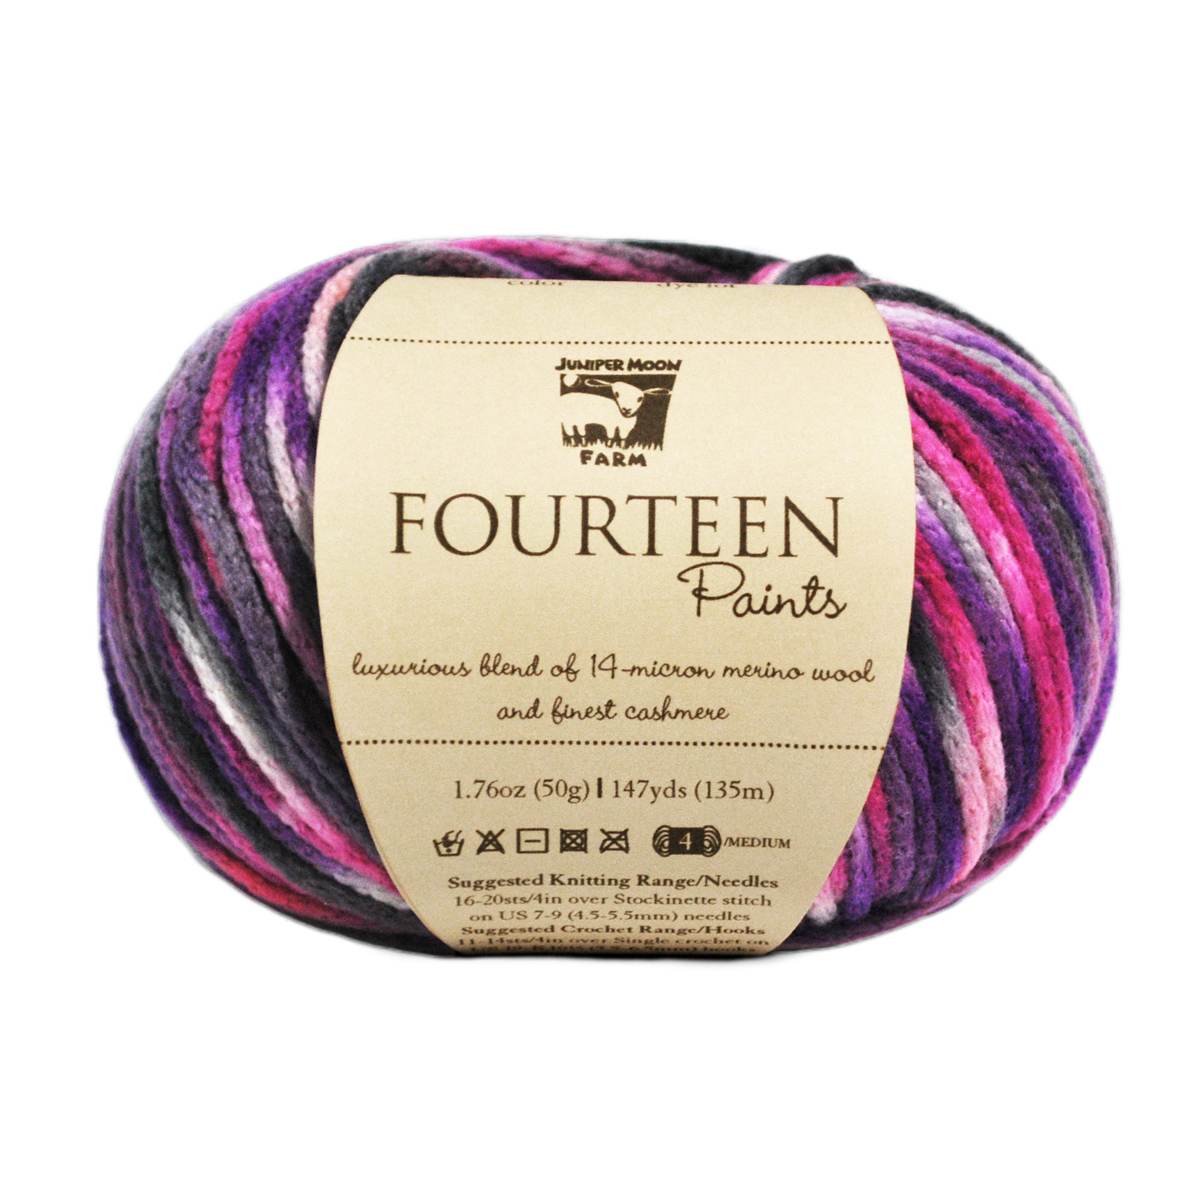 a skein of Fourteen Paints